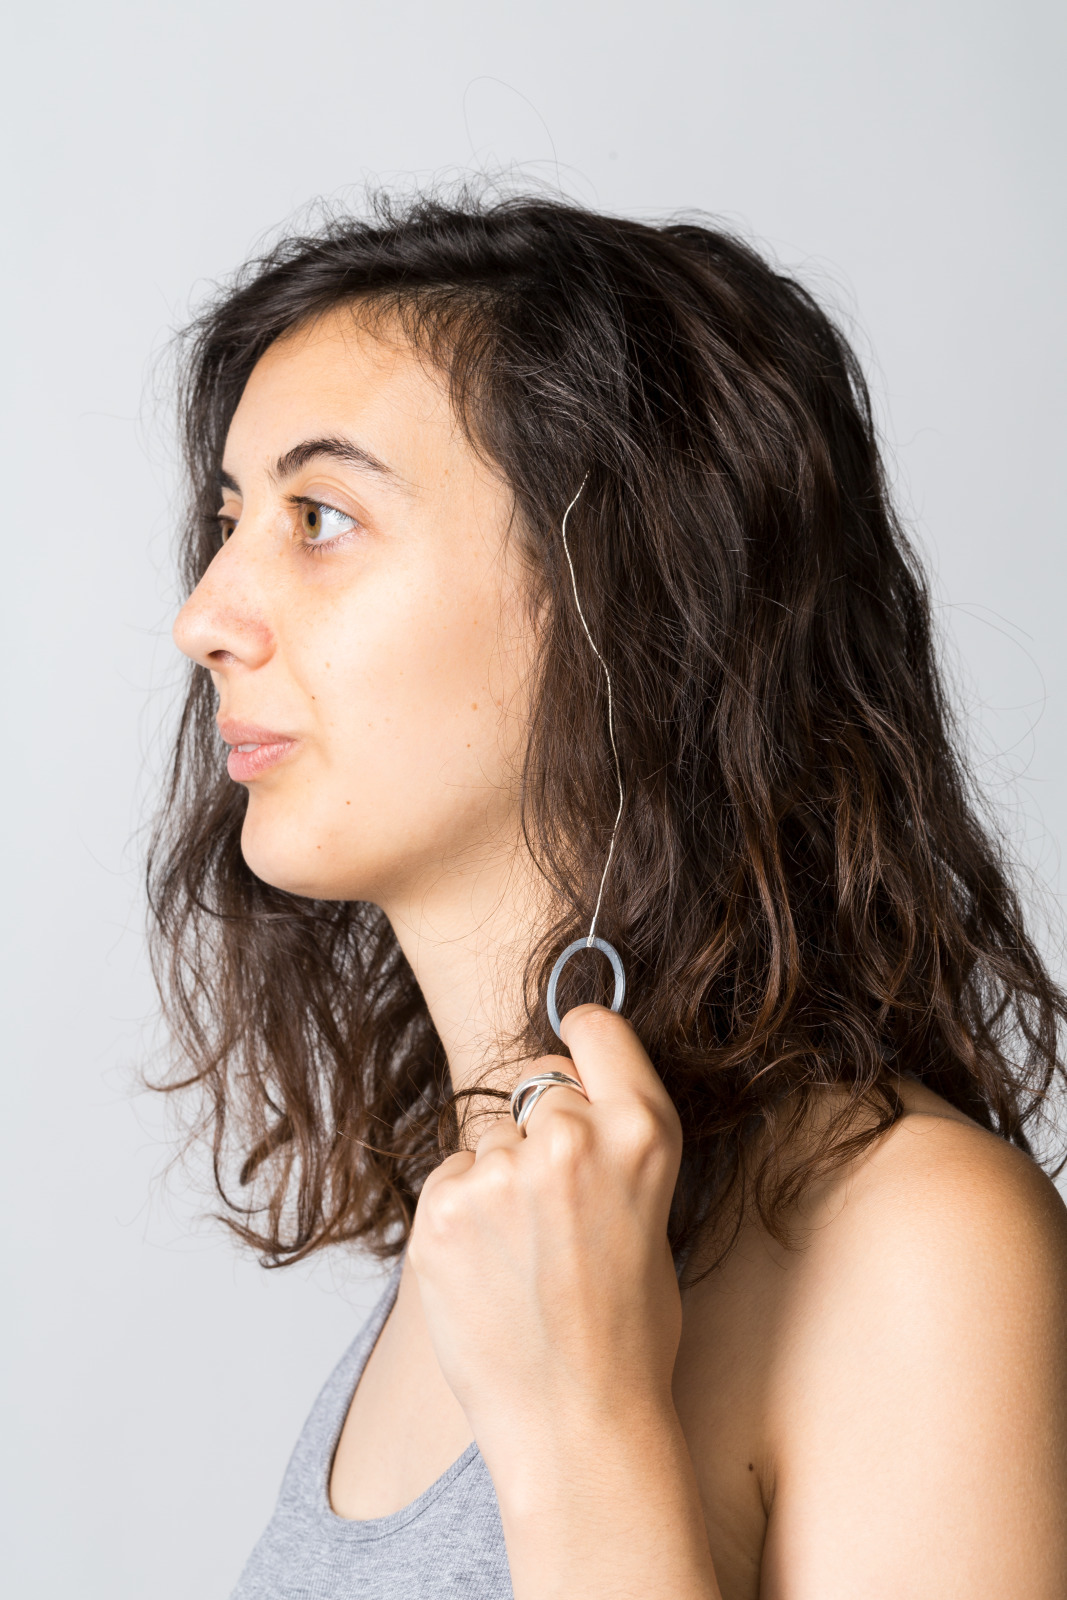 Portrait photo of the ring antenna on a woman